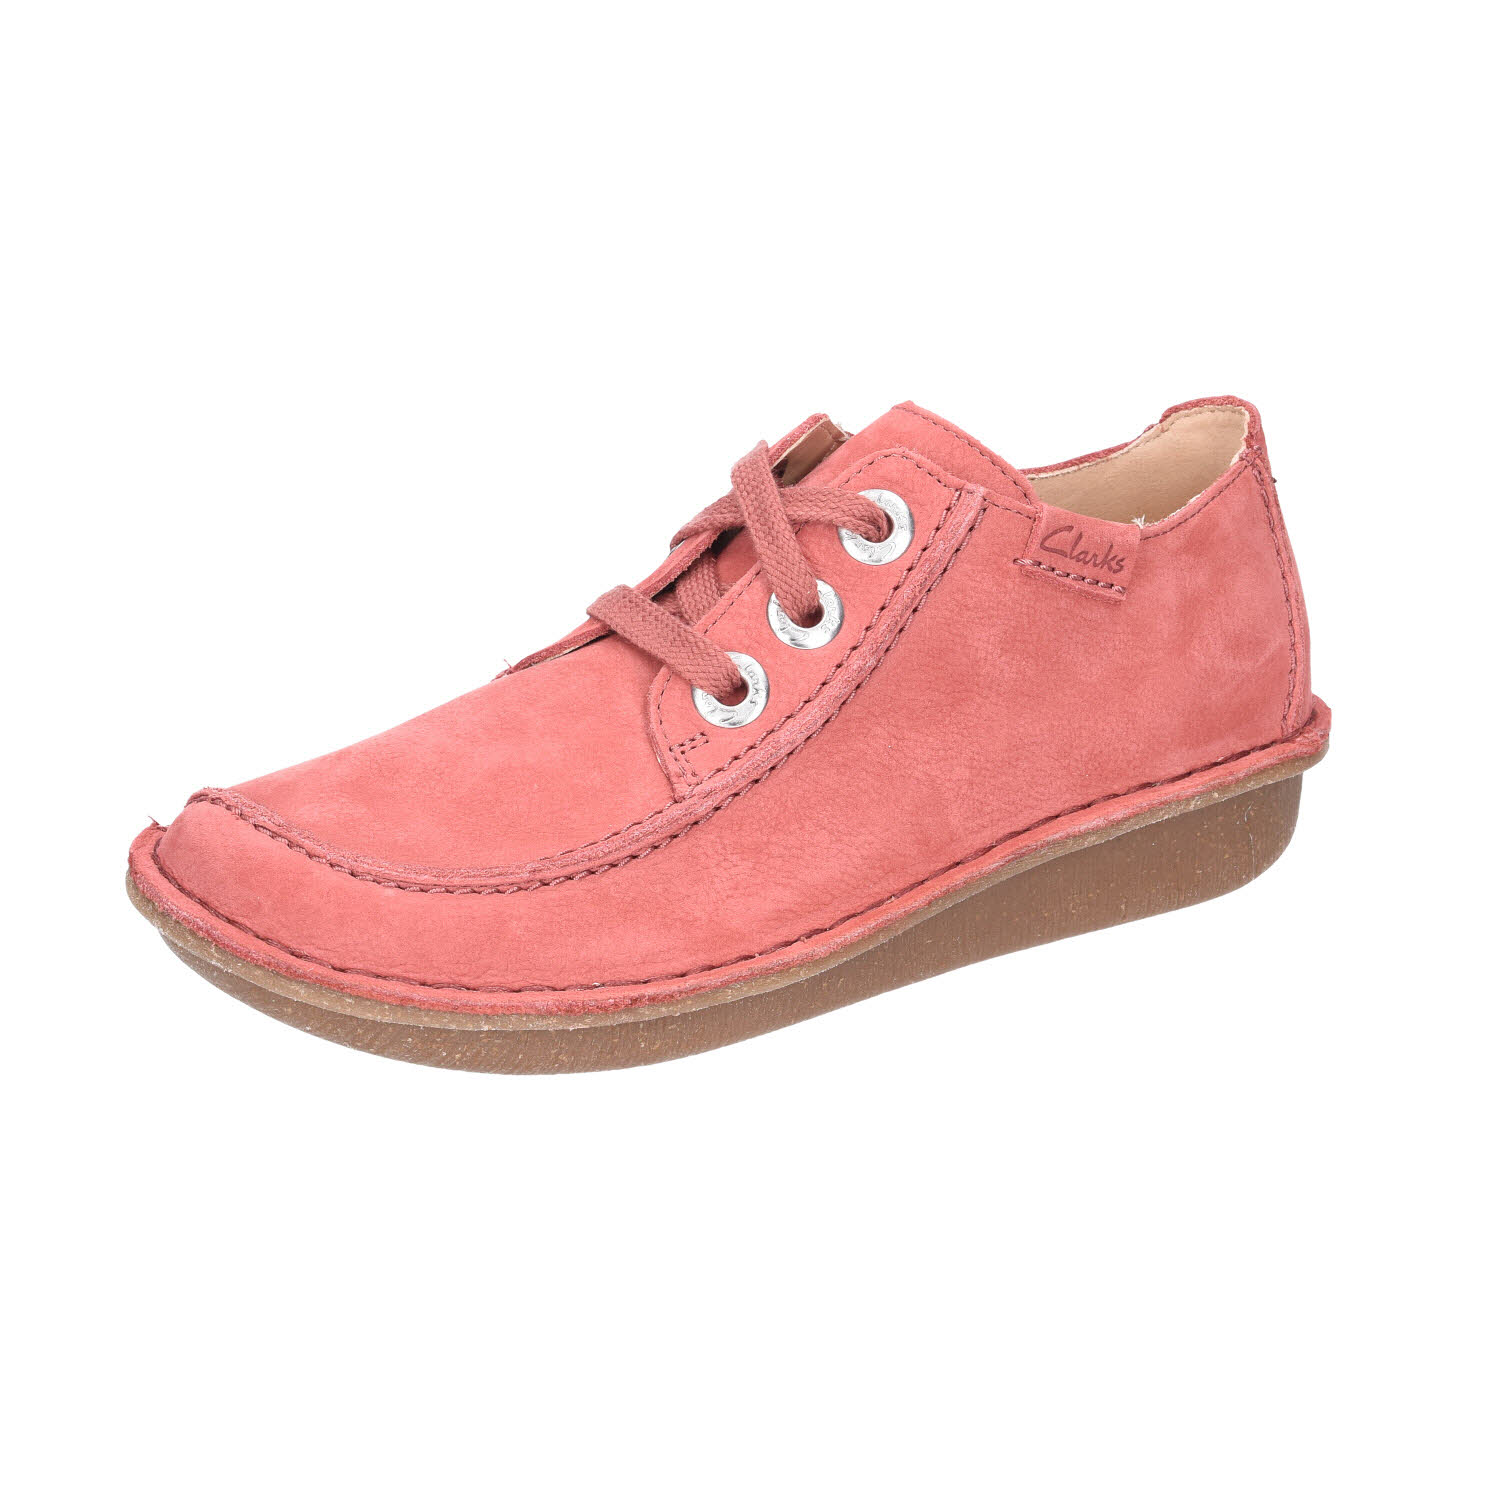 Clarks Funny Dream Dusty Rose rot Weite G